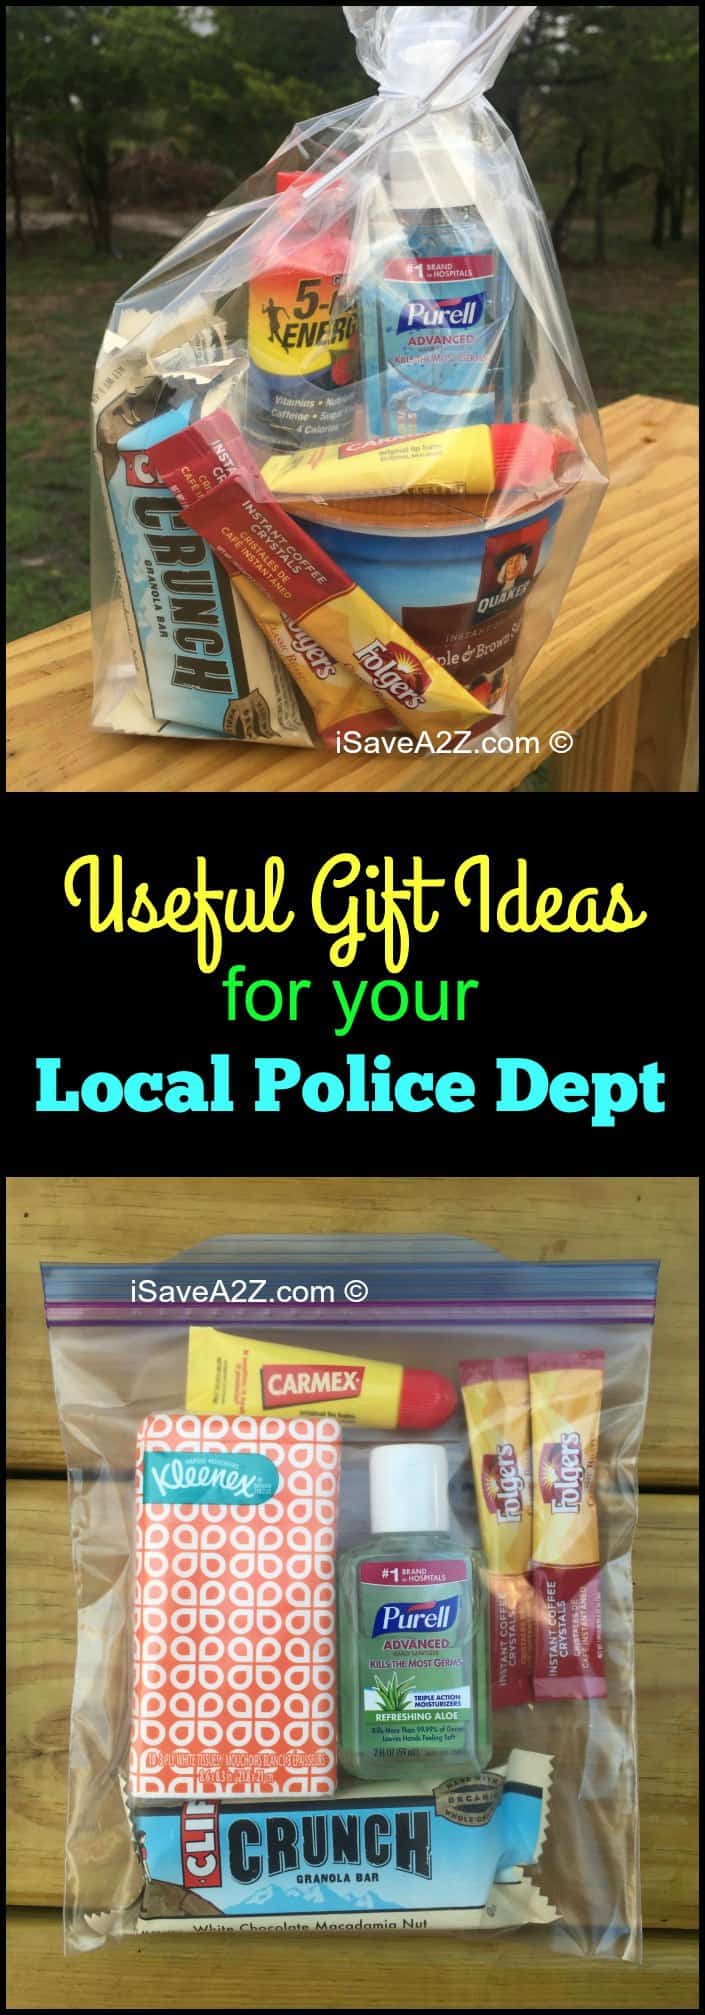 Cool Gifts for Police Officers - Search Shopping